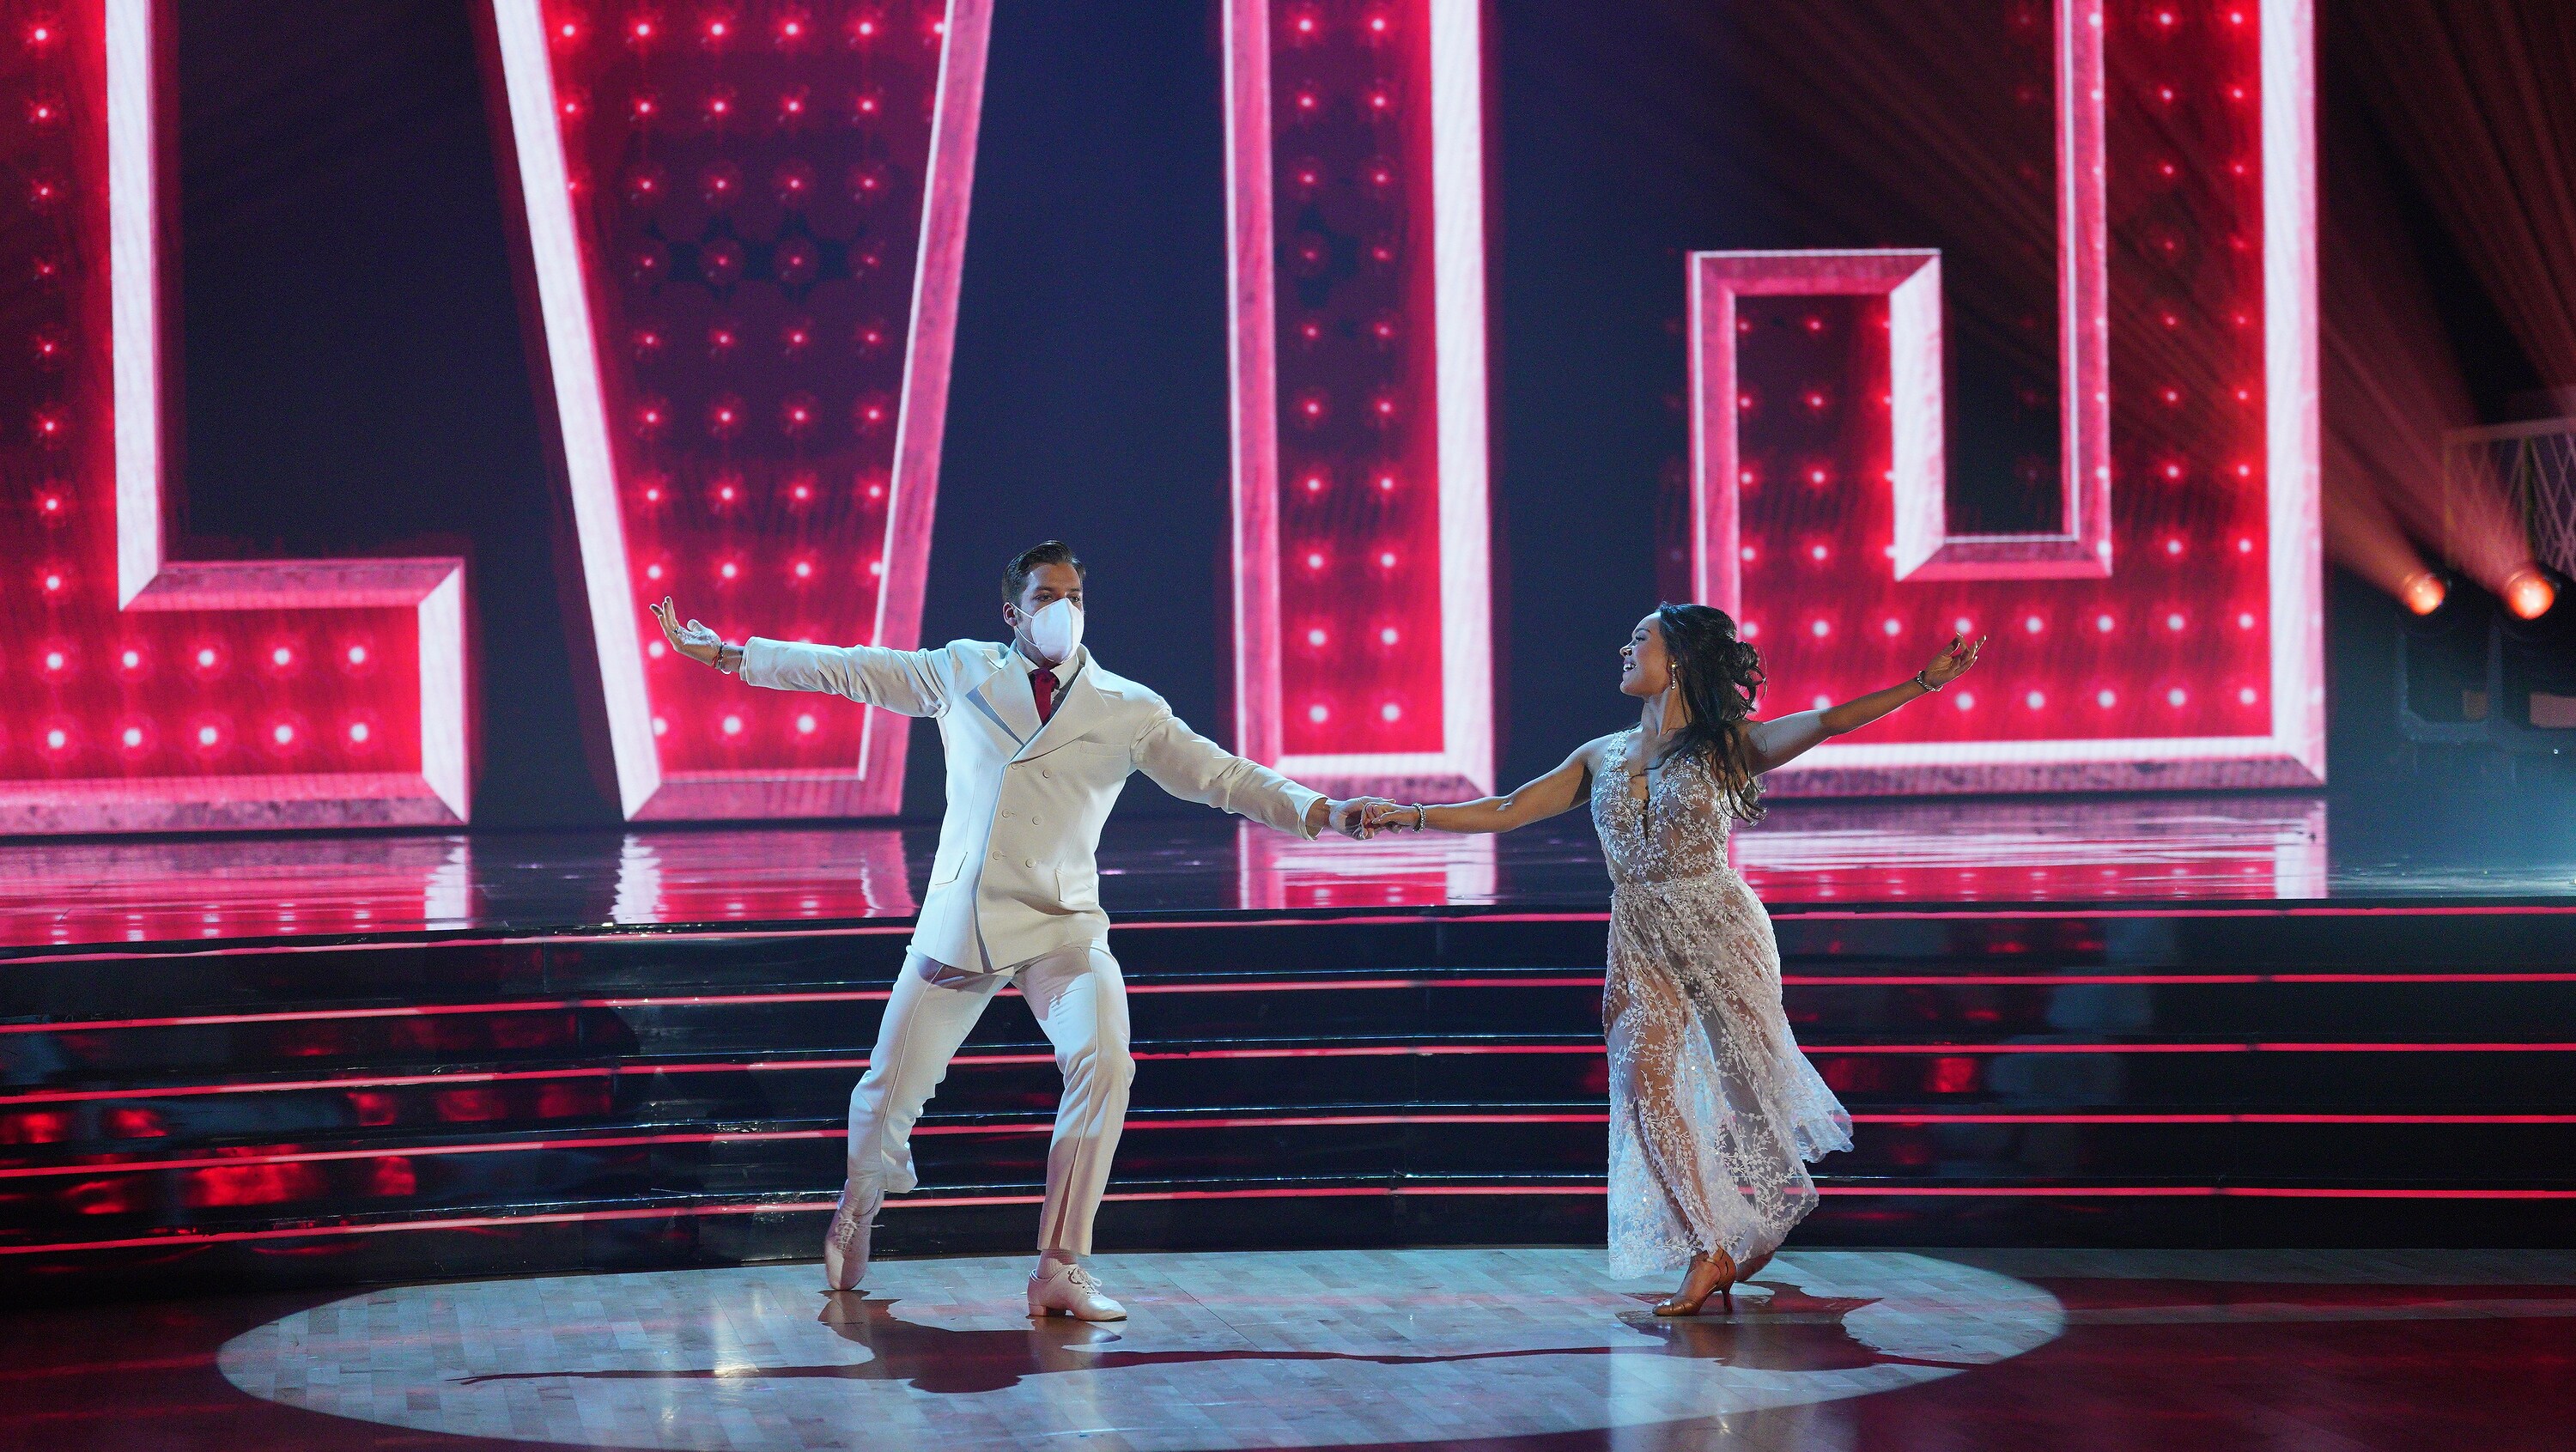 DANCING WITH THE STARS - “Elvis Night” –  The 15 remaining couples “Can’t Help Falling in Love” with Elvis this week as they take on all-new dance styles to music by The King of Rock ‘n’ Roll. Week two of the mirorrball competition will stream live MONDAY, SEPT. 26 (8:00pm ET / 5:00pm PT), on Disney+. (ABC/Christopher Willard) JOSEPH BAENA, ALEXIS WARR